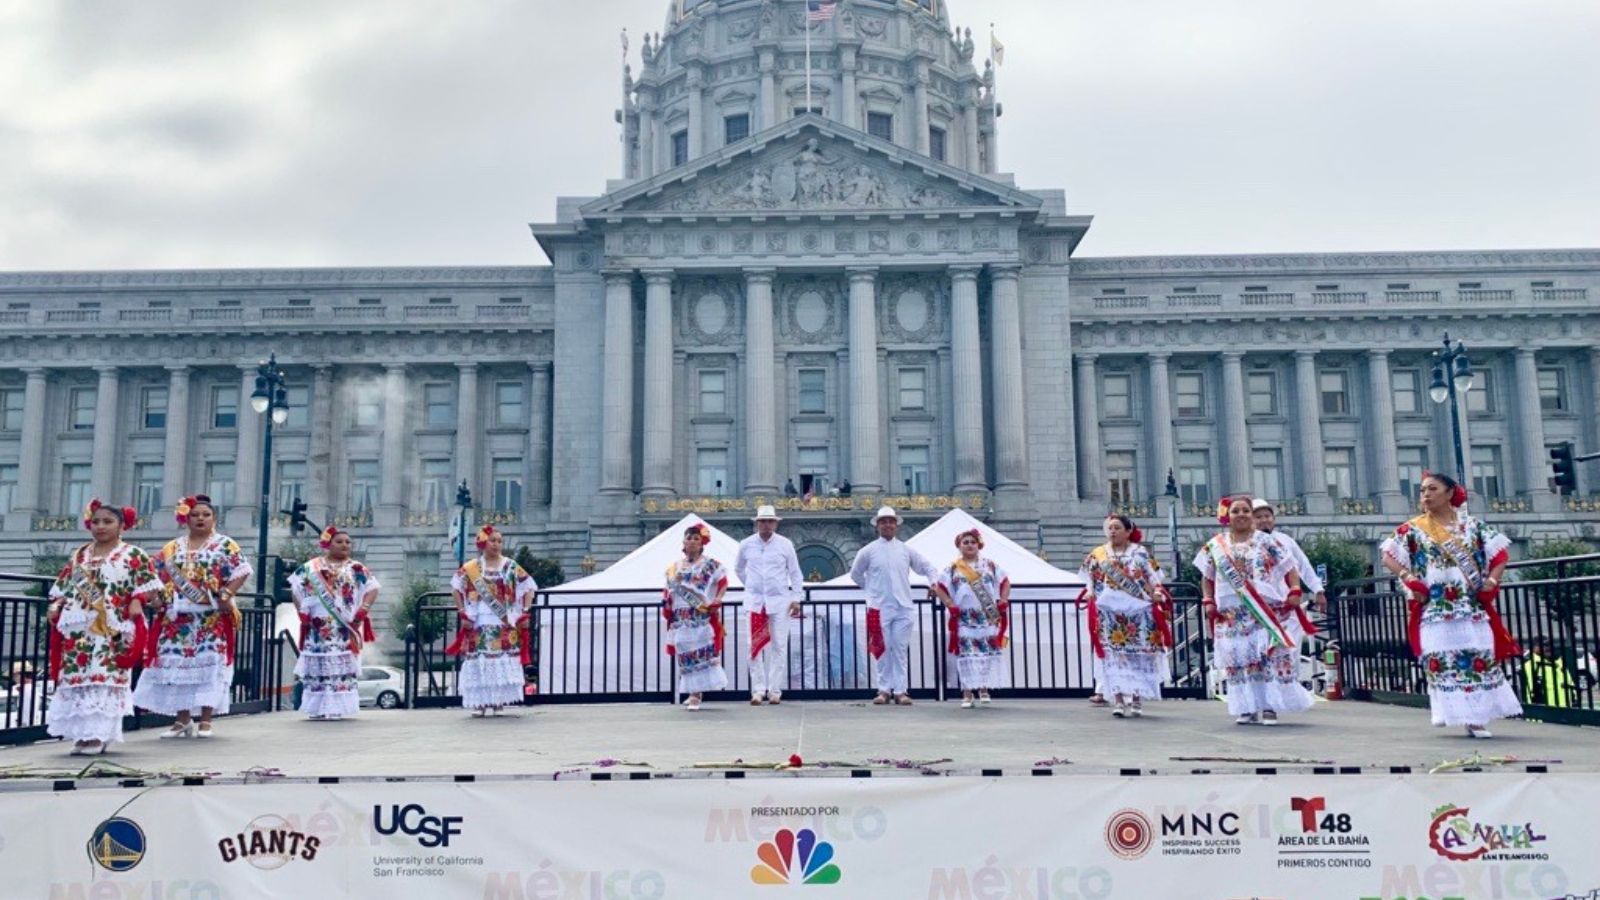 Dancers performing on stage in front of San Francisco City Hall